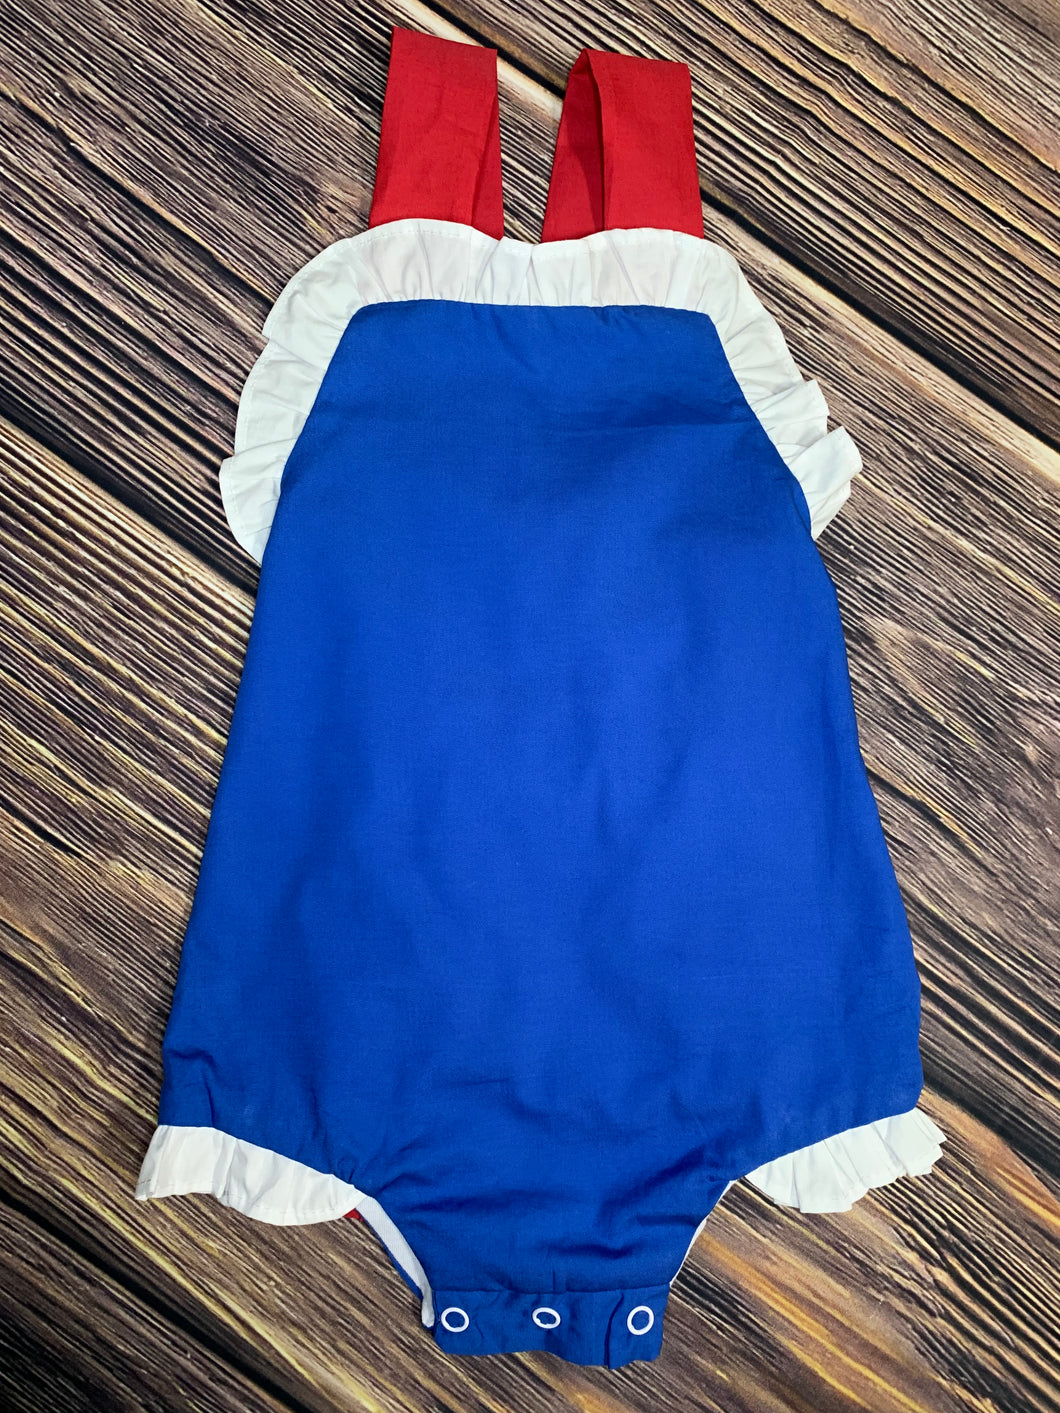 Sun Suit, Blue with Red Straps and White Ruffled Trim